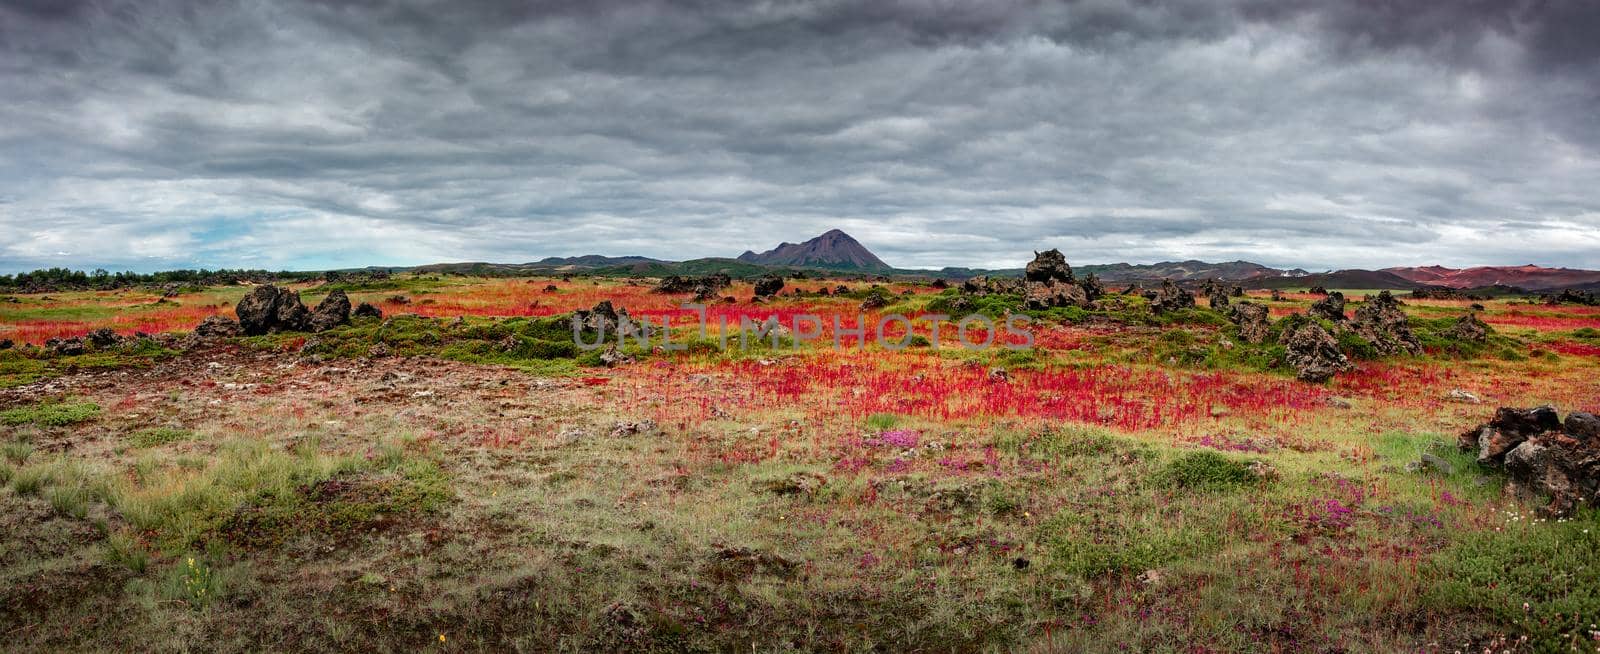 Panoramic view of lava field near lake Myvatn, town Reykjahlid, and volcanoes Hverfjall and Krafla on Iceland